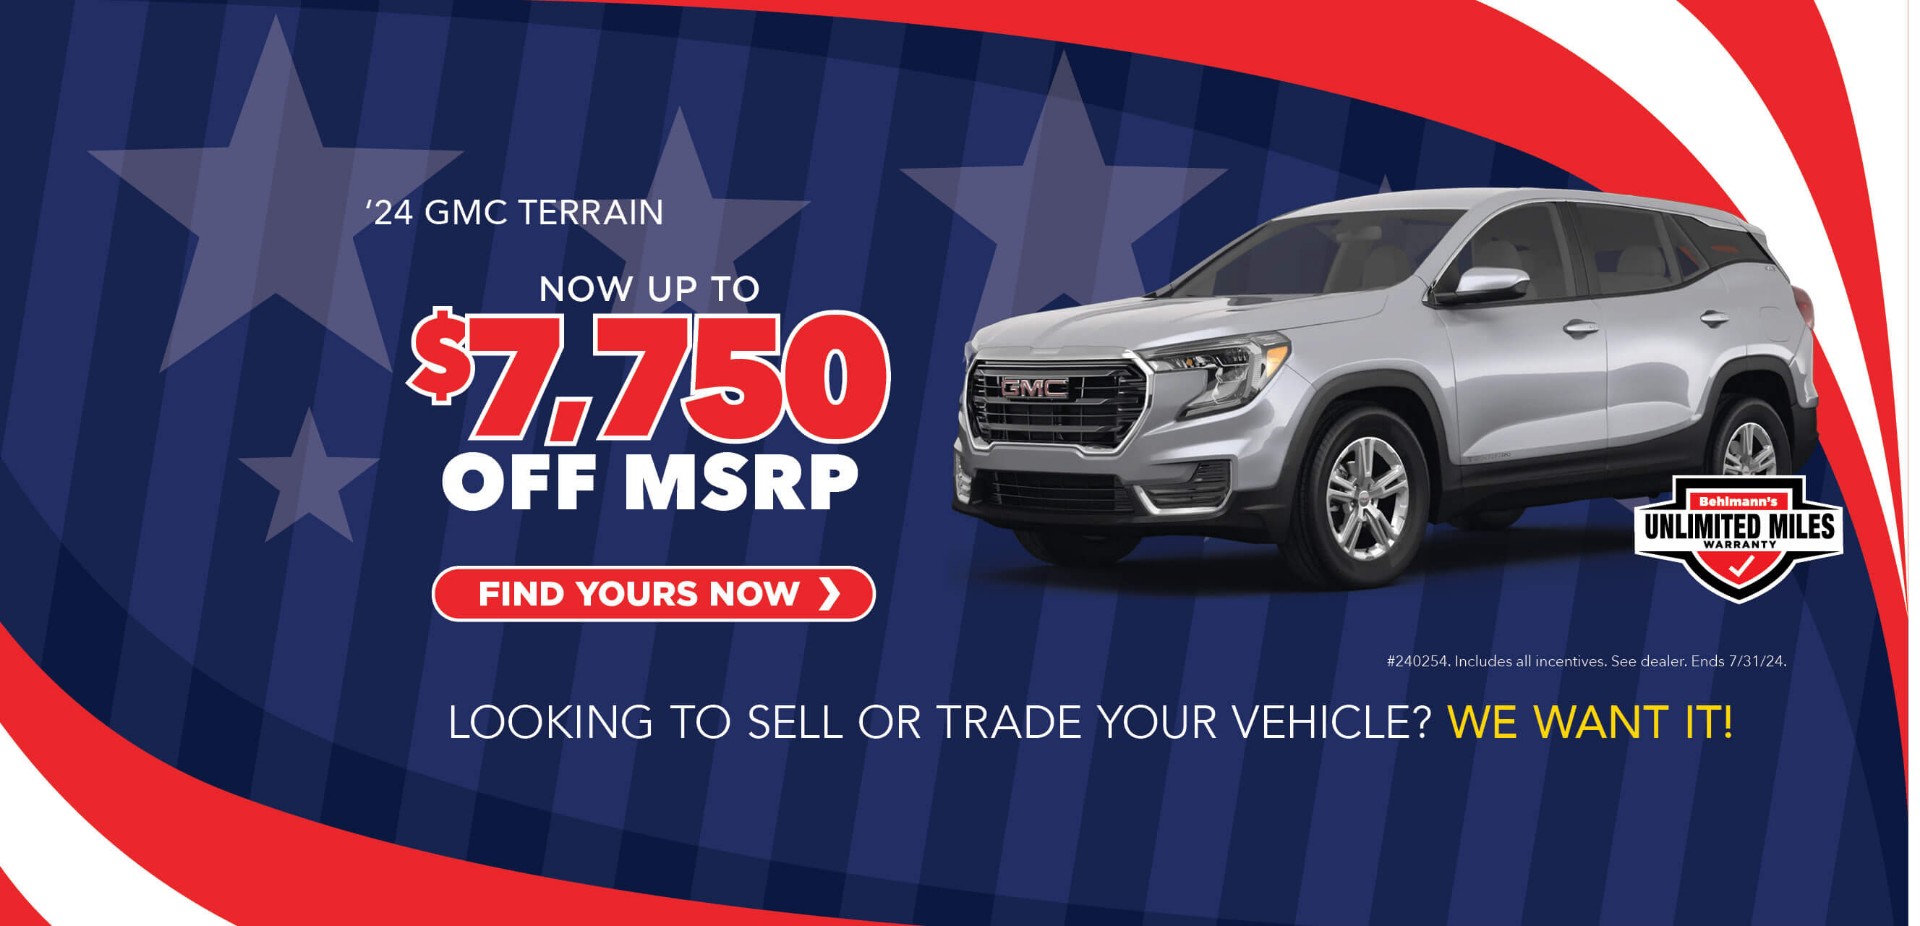 Silver SUV with advertising slogans: Behlmann discount now up to $7,750 off MSRP on 2024 GMC Terrain.